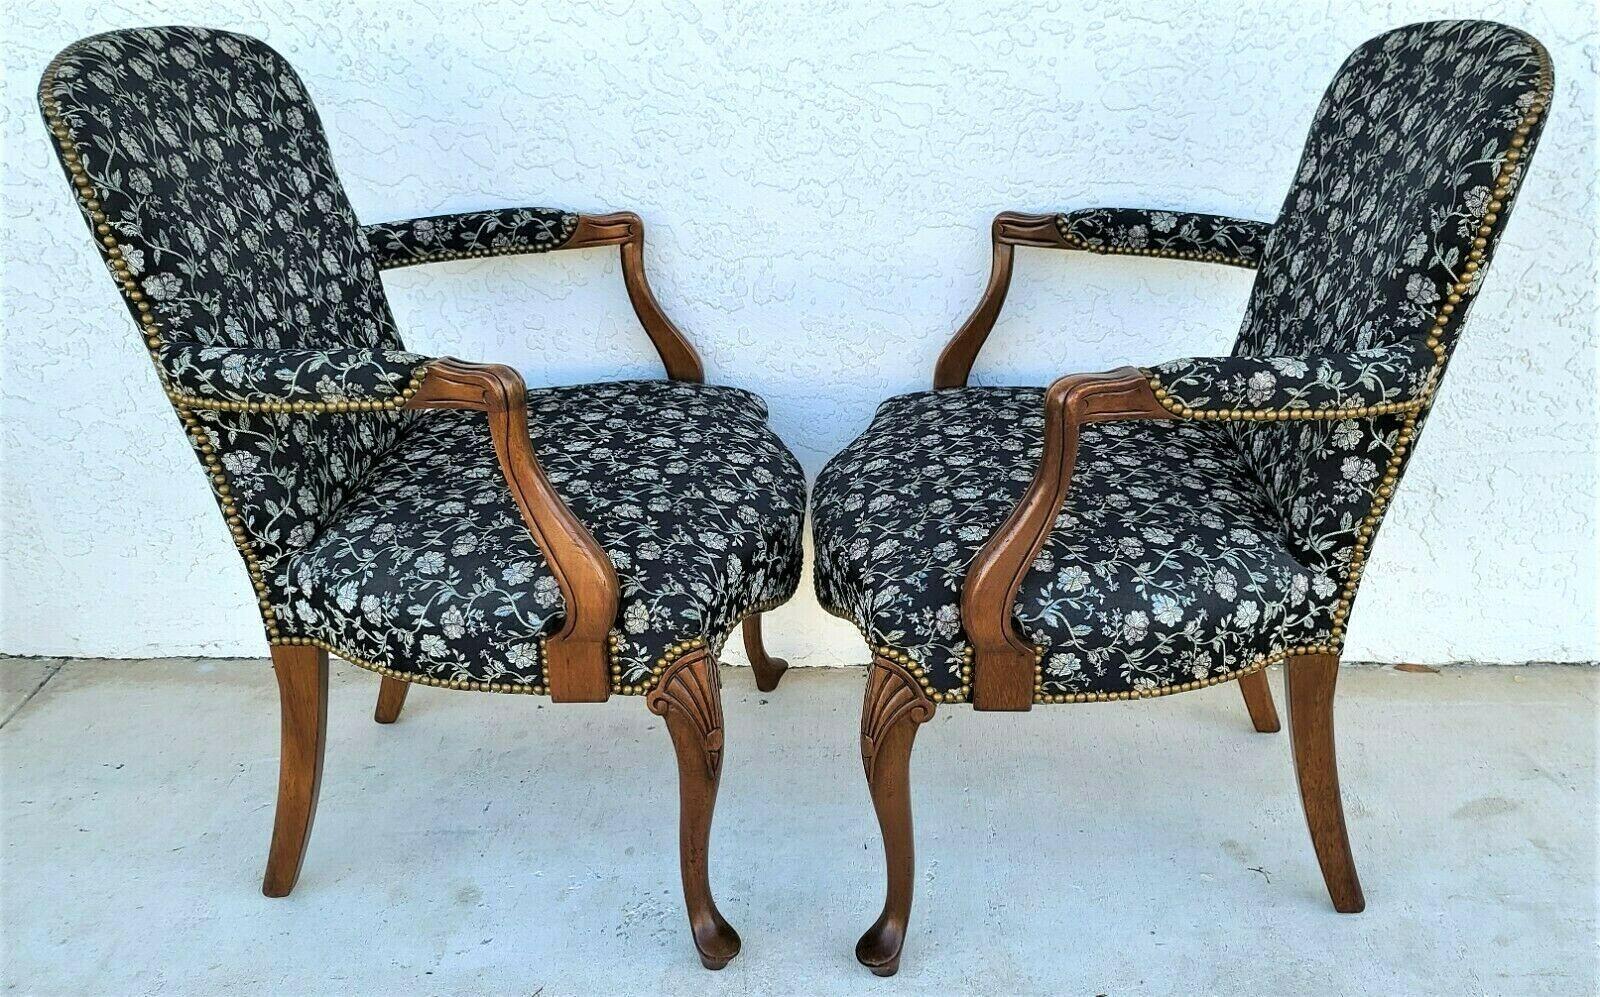 Vintage French Country Provincial Walnut Fauteuil Armchairs, a Pair In Good Condition For Sale In Lake Worth, FL